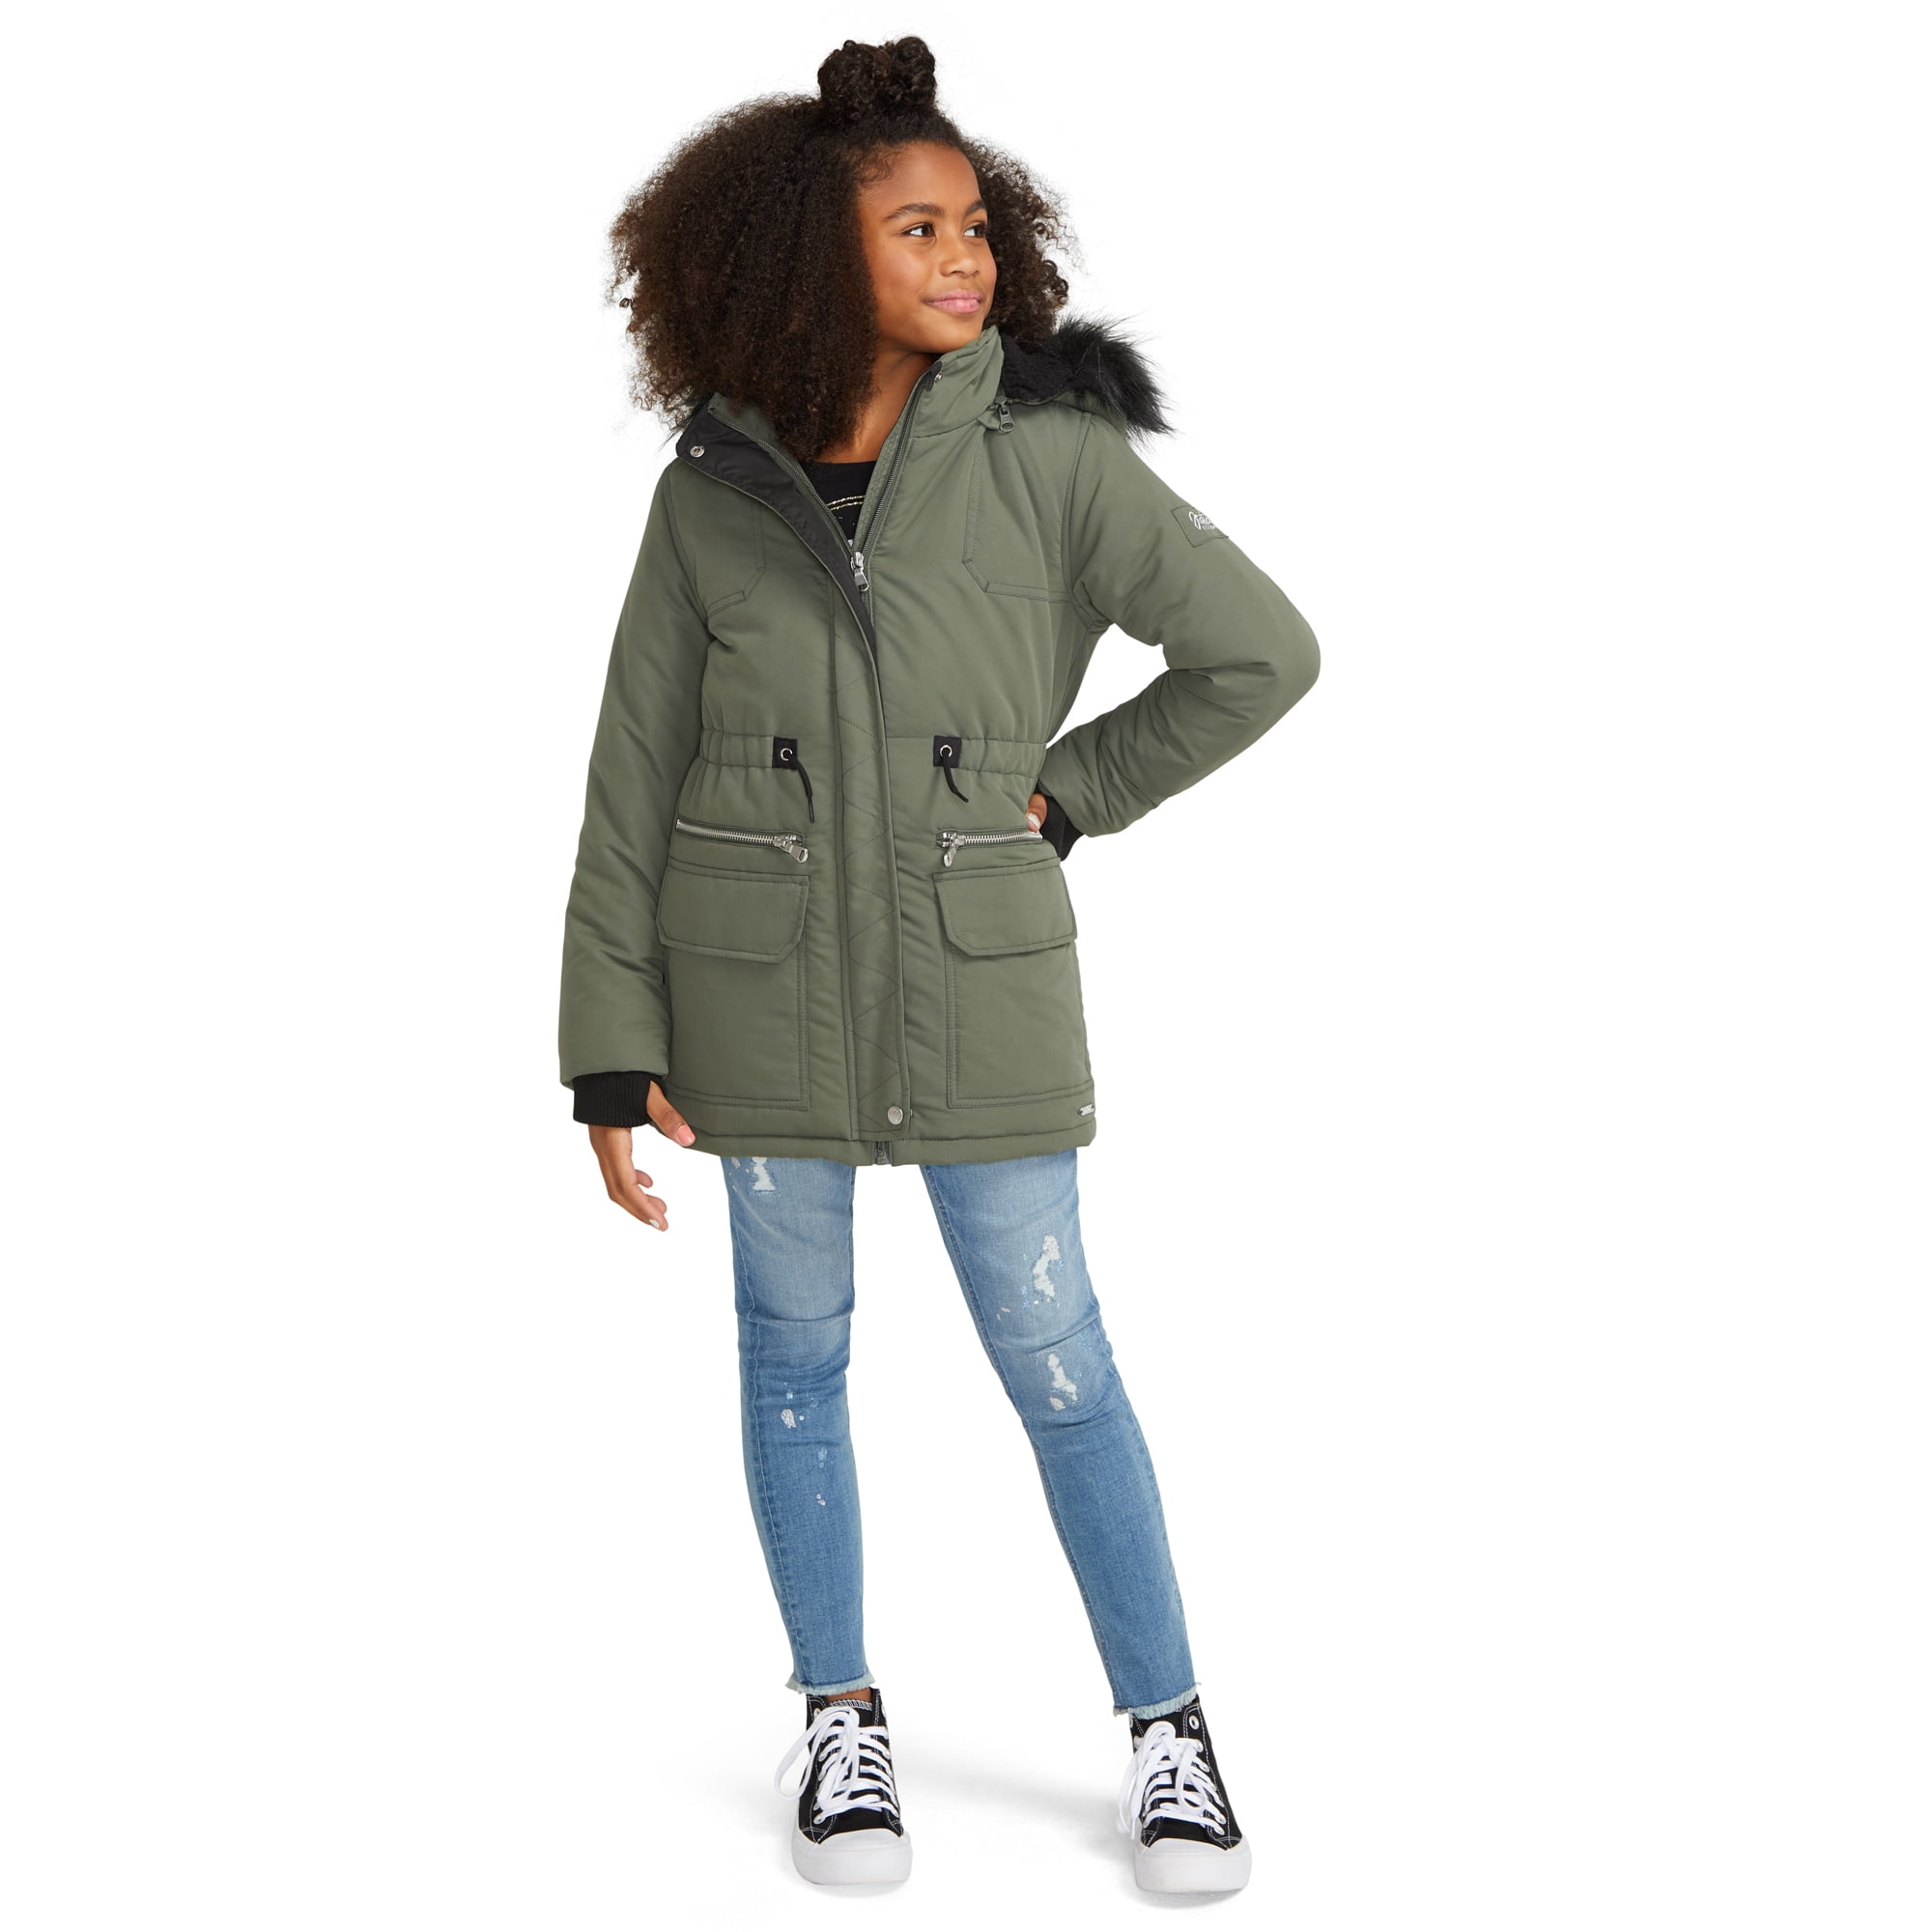 Girls Water-Resistant Canvas Faux Fur Pile-Lined Parka with Hood, - Walmart.com